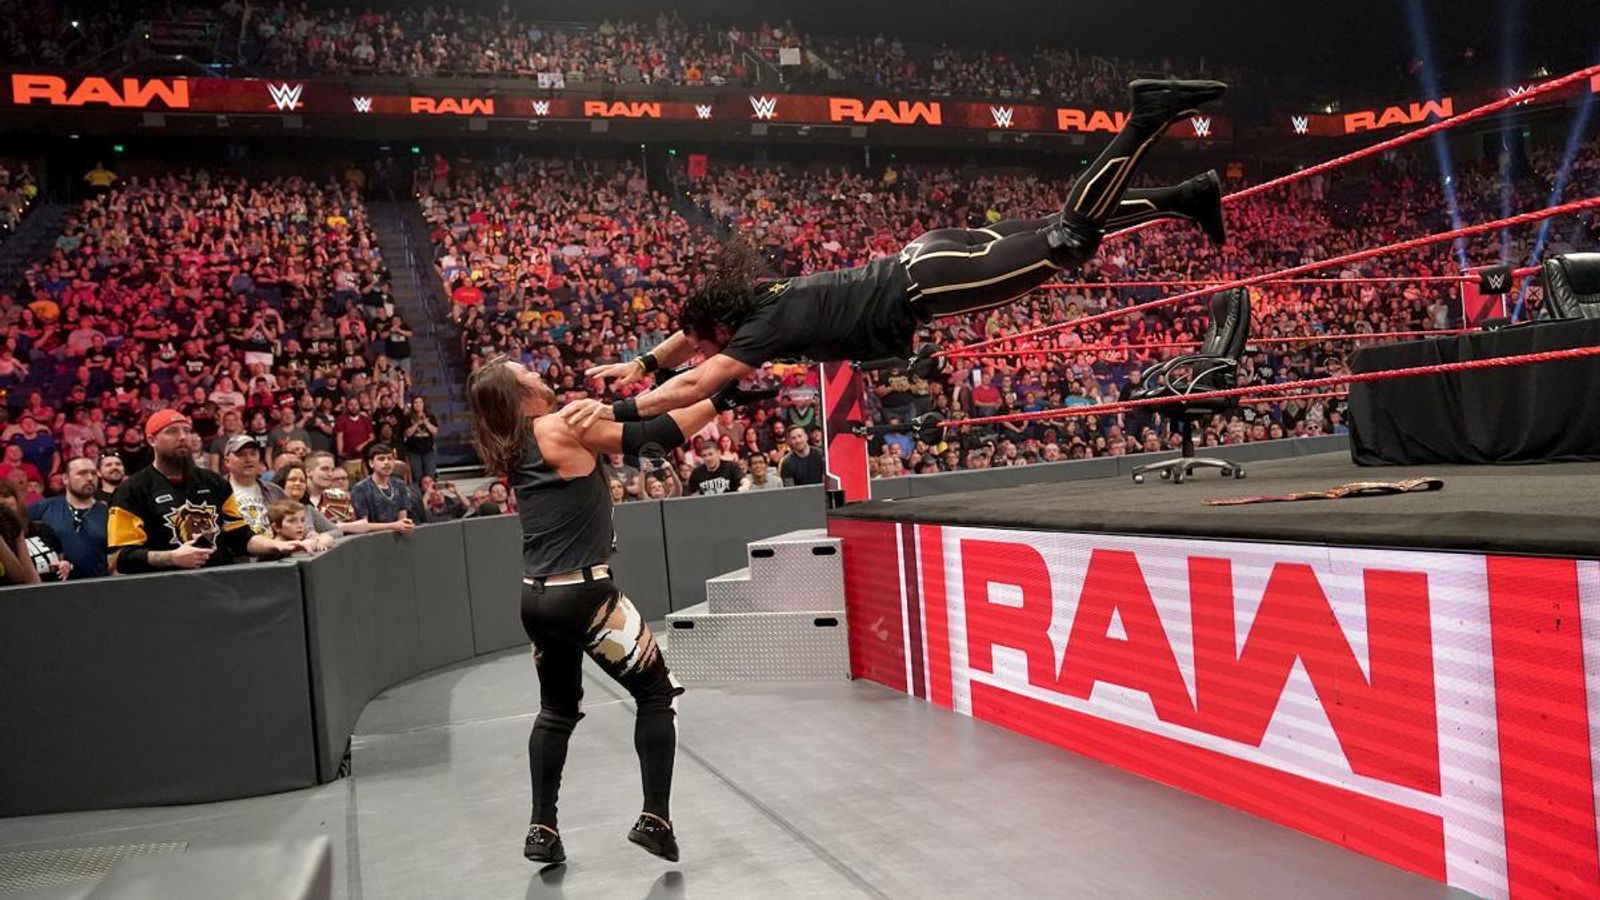 WATCH Best of WWE Raw highlights from the Monday night show WWE